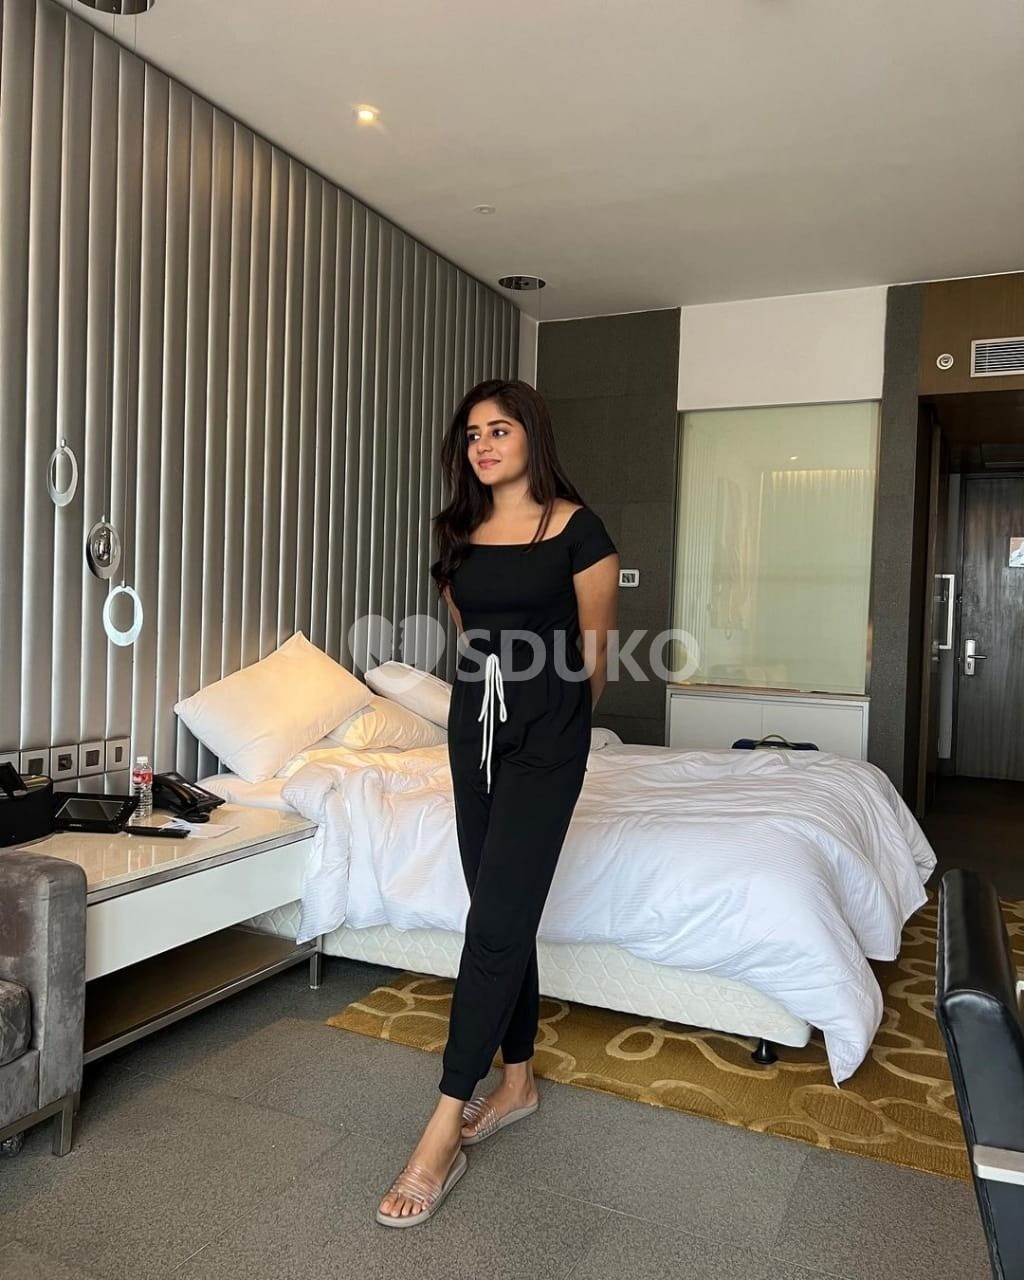 Tollygunge 🌟 █▬█⓿▀█▀ 𝐆𝐈𝐑𝐋 𝐇𝐎𝐓 𝐀𝐍𝐃 𝐒𝐄XY GIRLS AND HOUSEWIFE AVAILABL